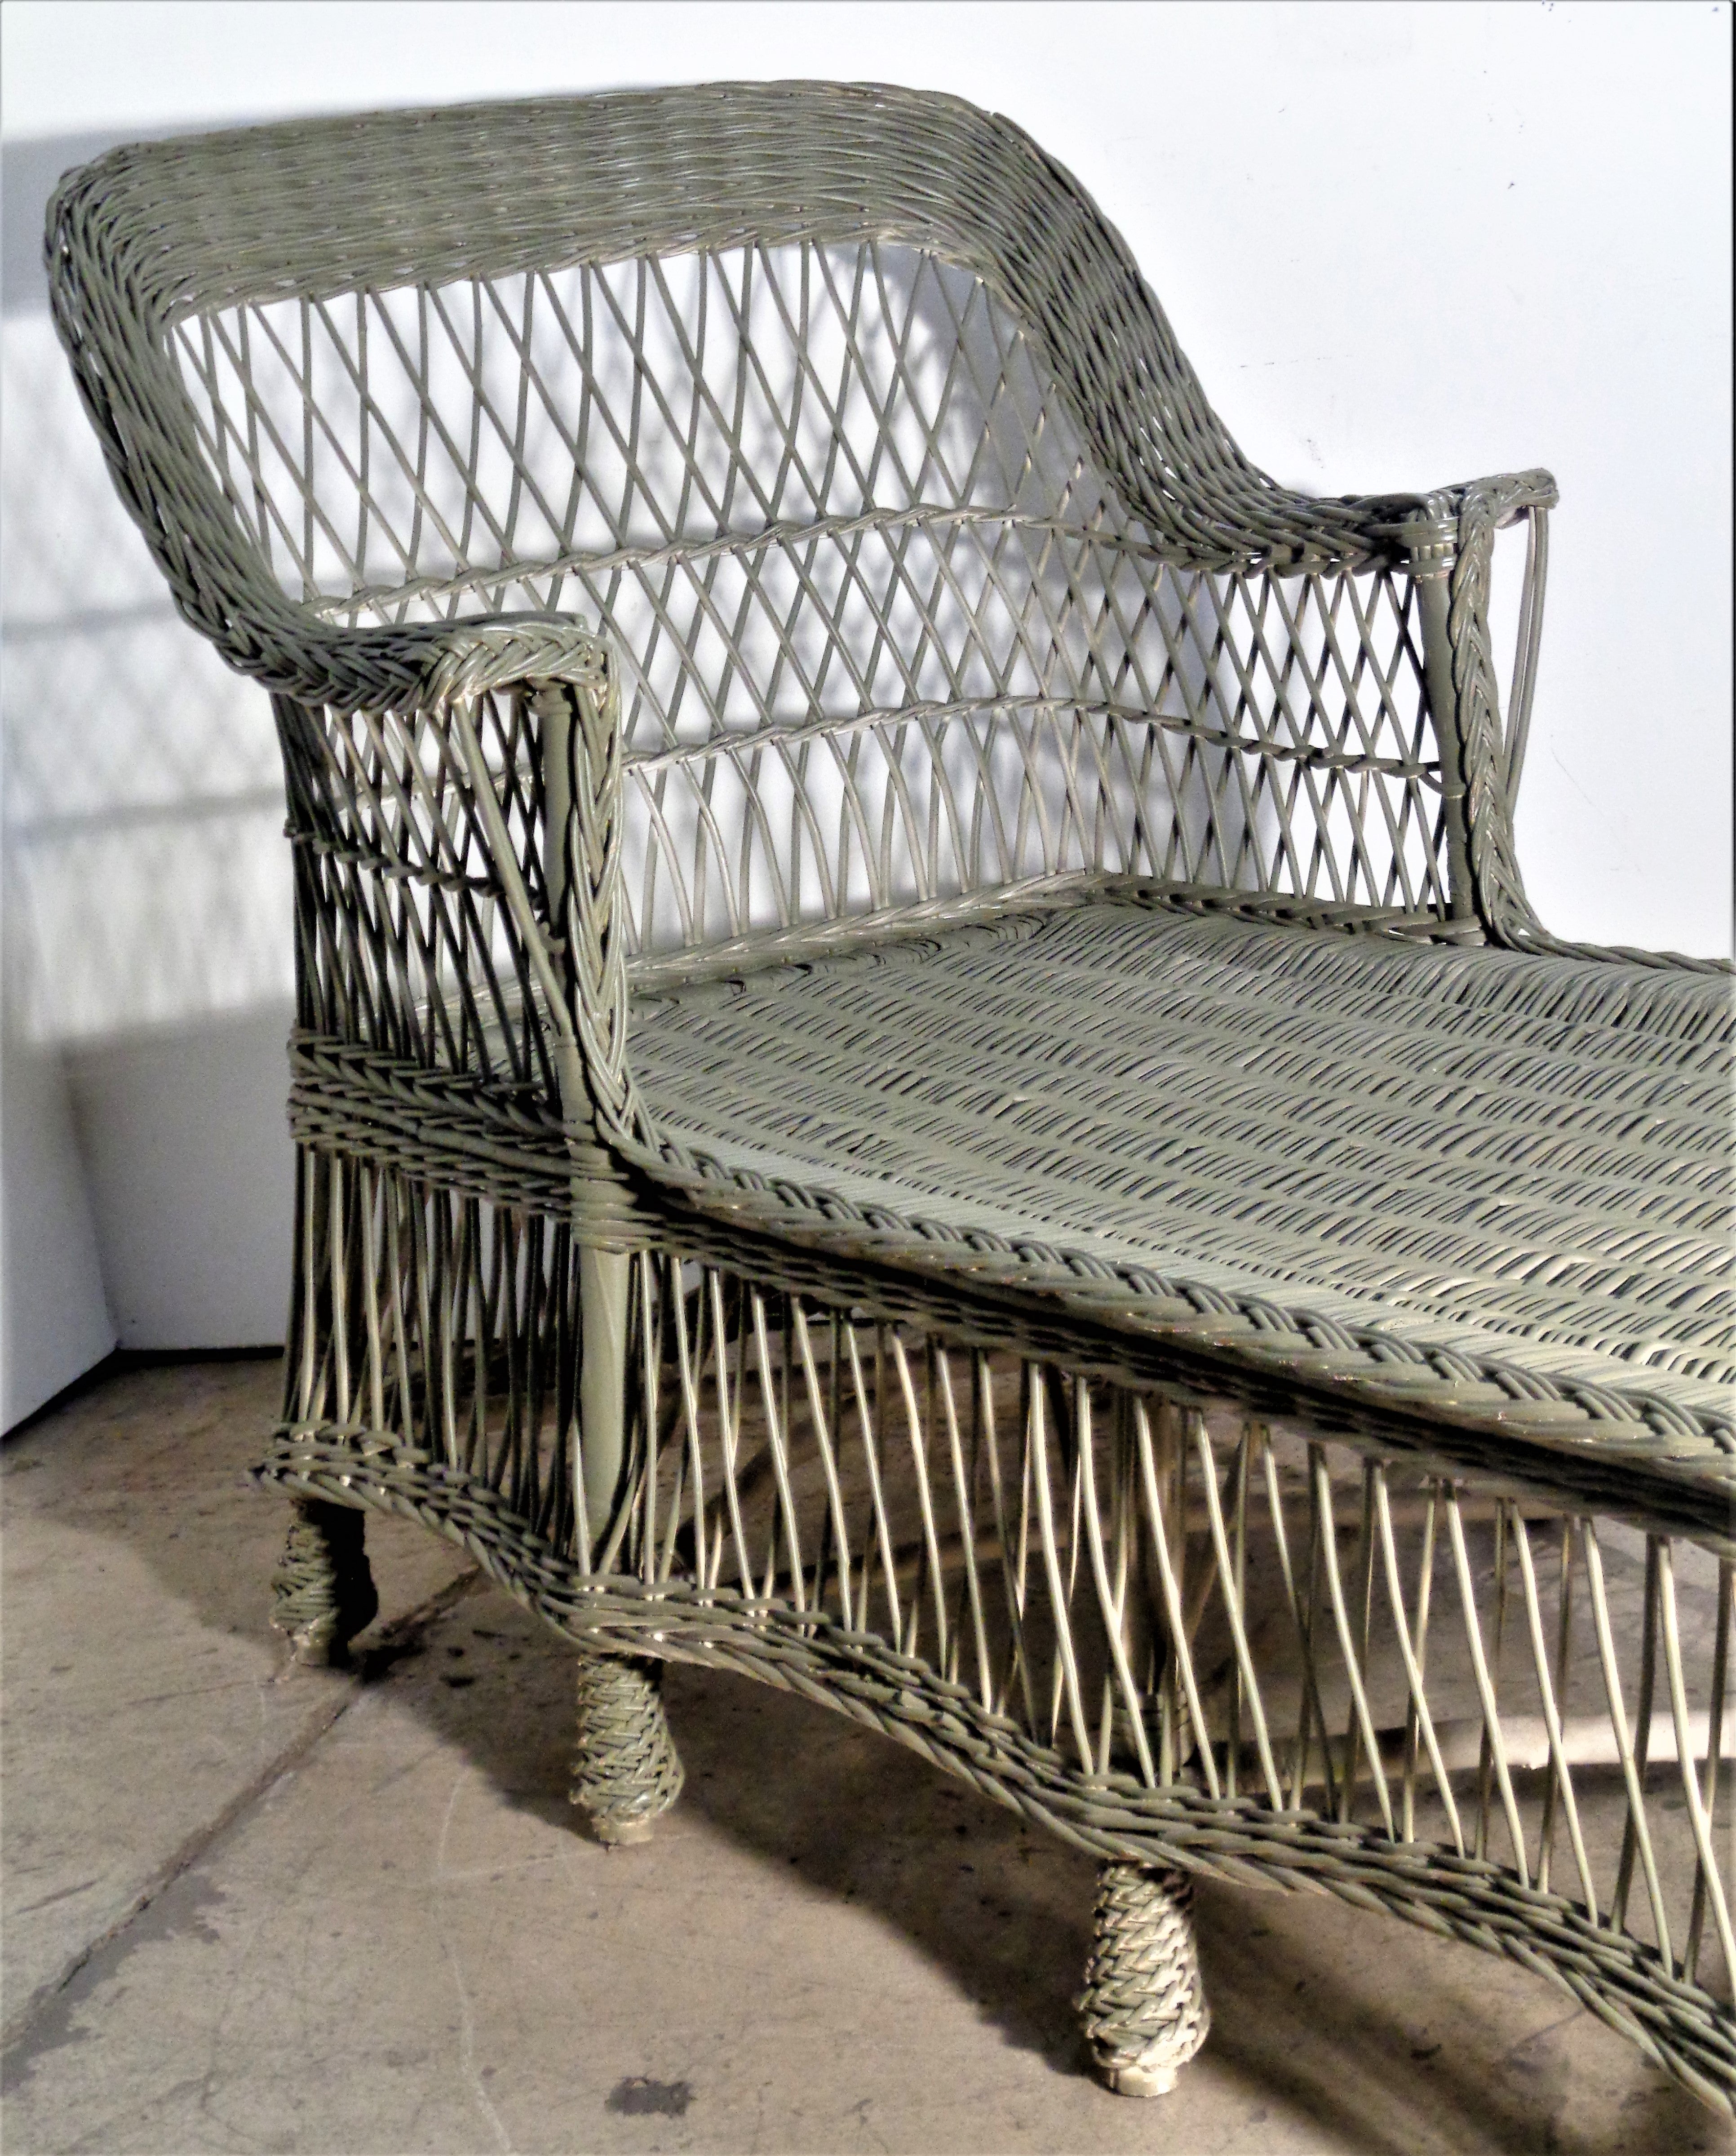 Antique Bar Harbor sage green painted woven wicker willow chaise lounge with wood framework and intricately woven feet. Circa 1920-1940's. Look at all pictures and read condition report in comment section. 
**** Delivery can be arranged from